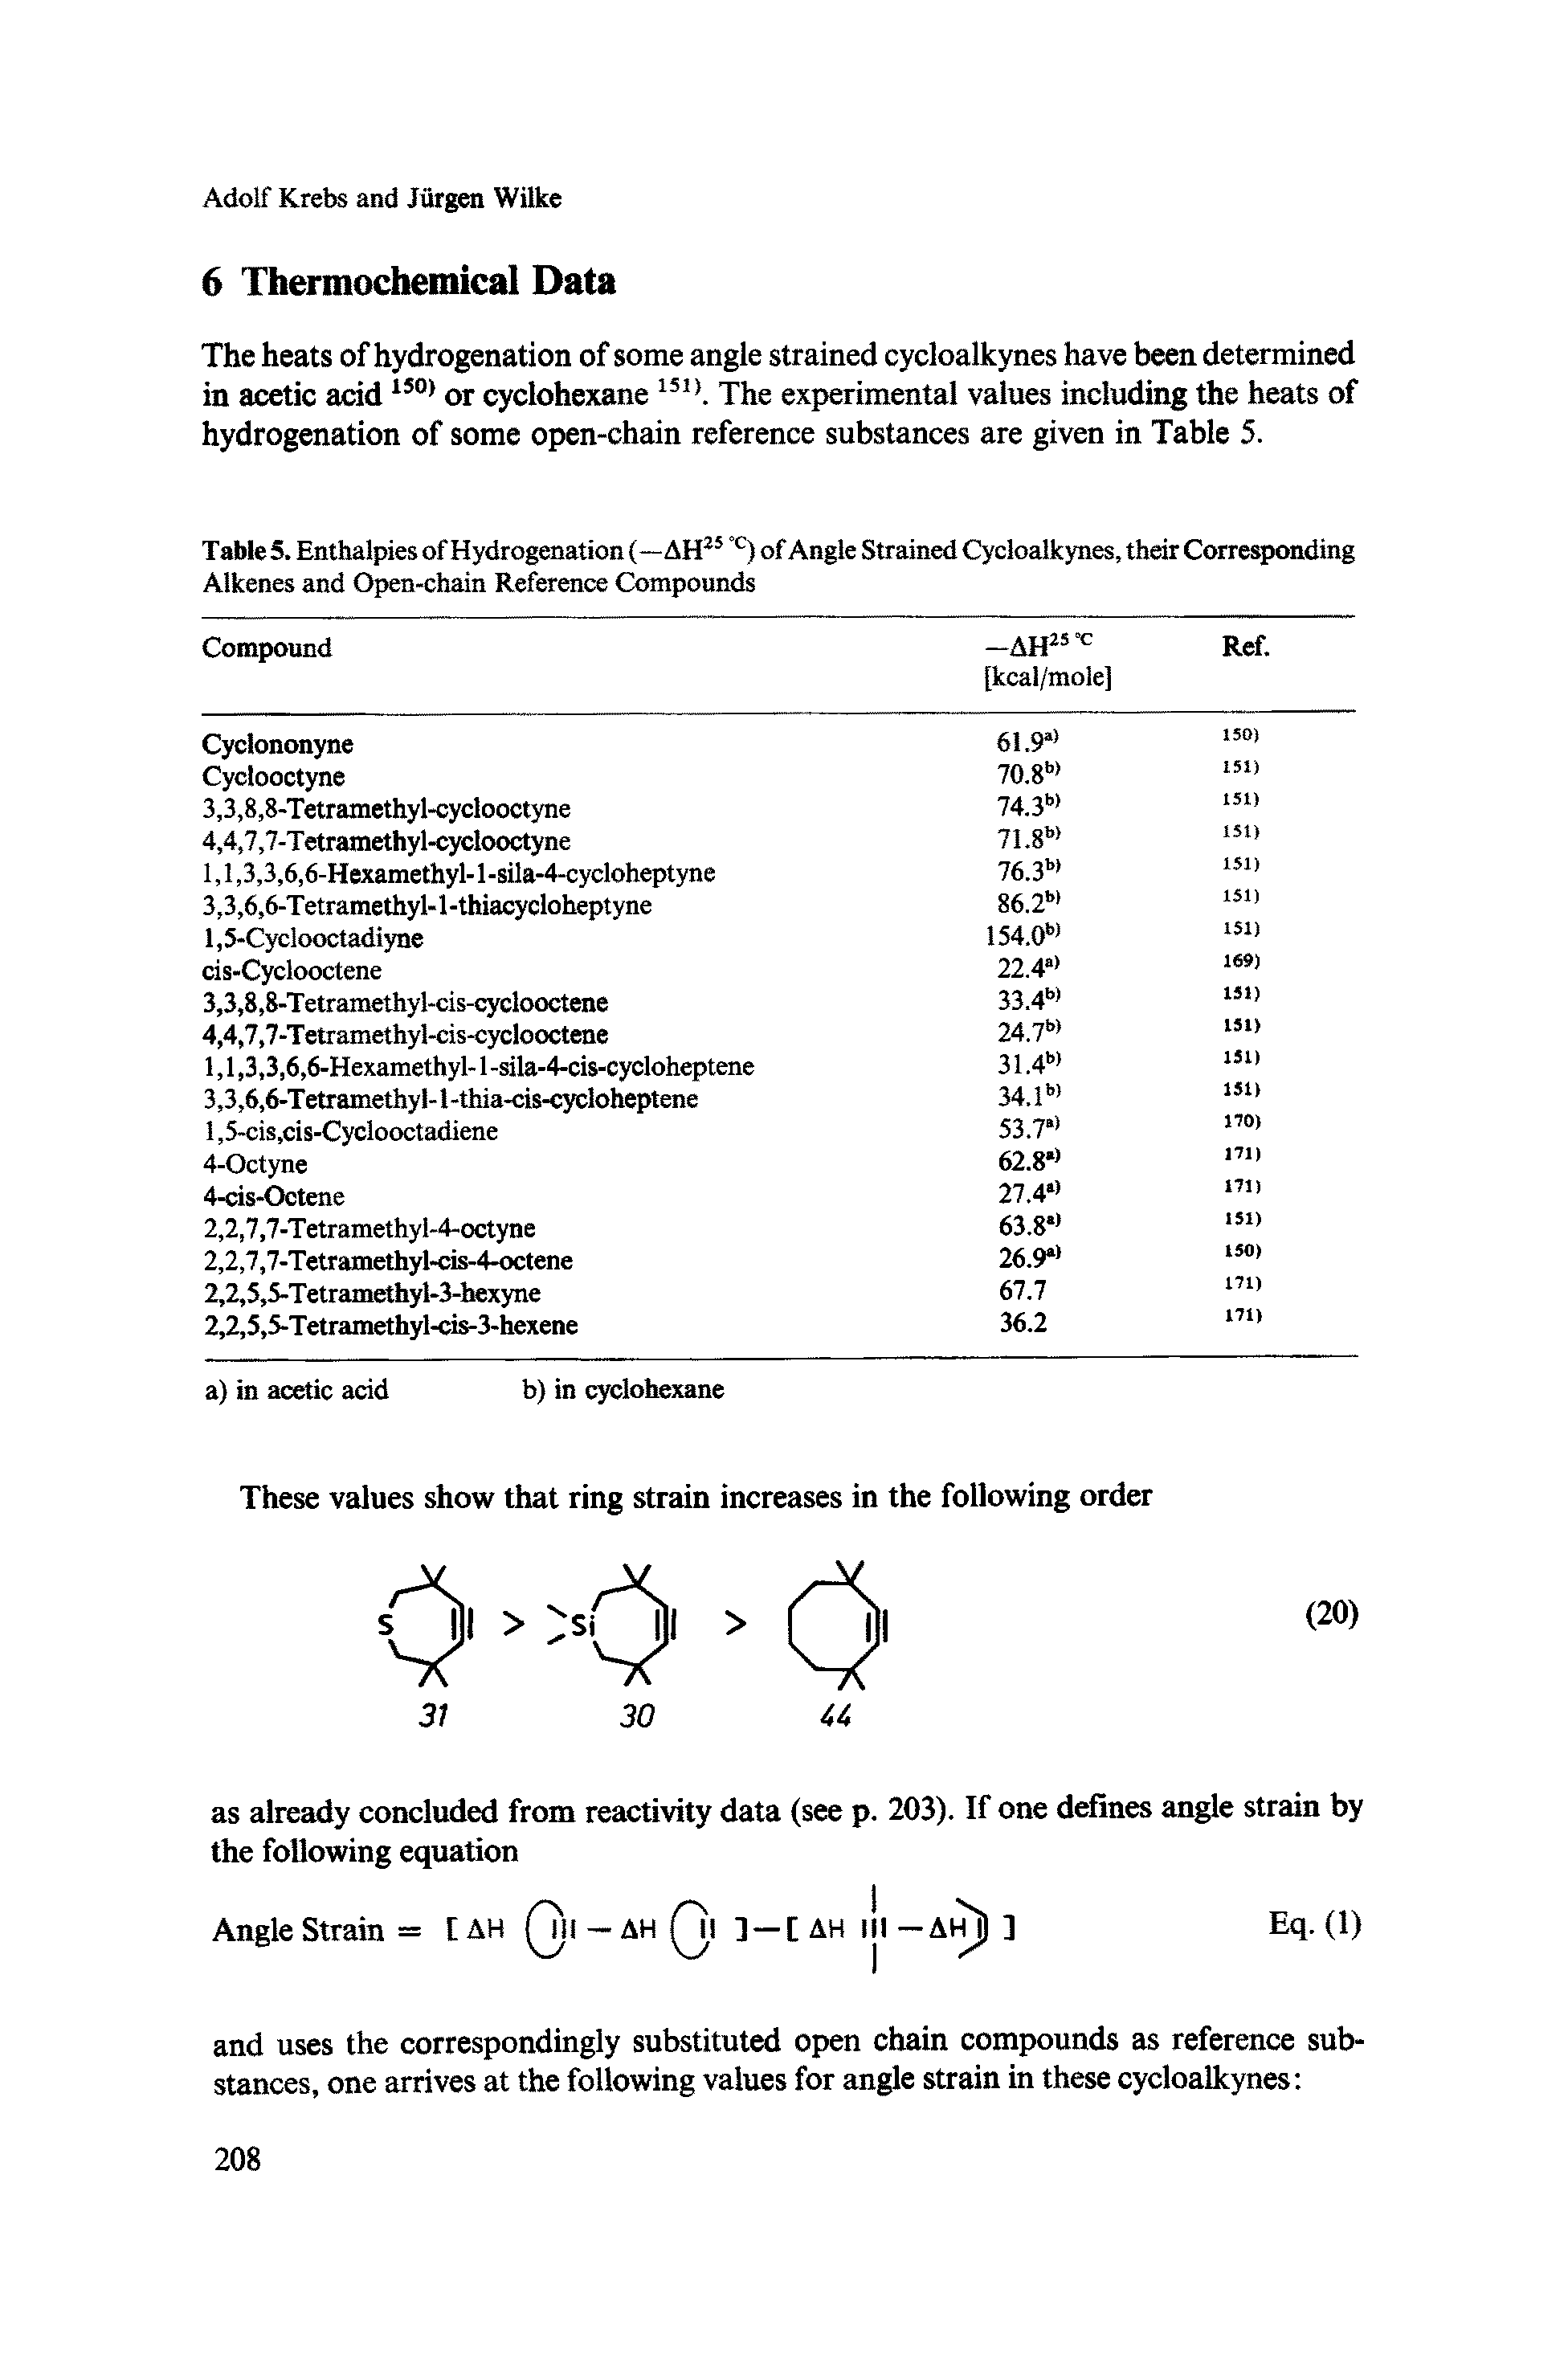 Table 5. Enthalpies of Hydrogenation (—AH25 °c) of Angle Strained Cycloalkynes, their Corresponding Alkenes and Open-chain Reference Compounds...